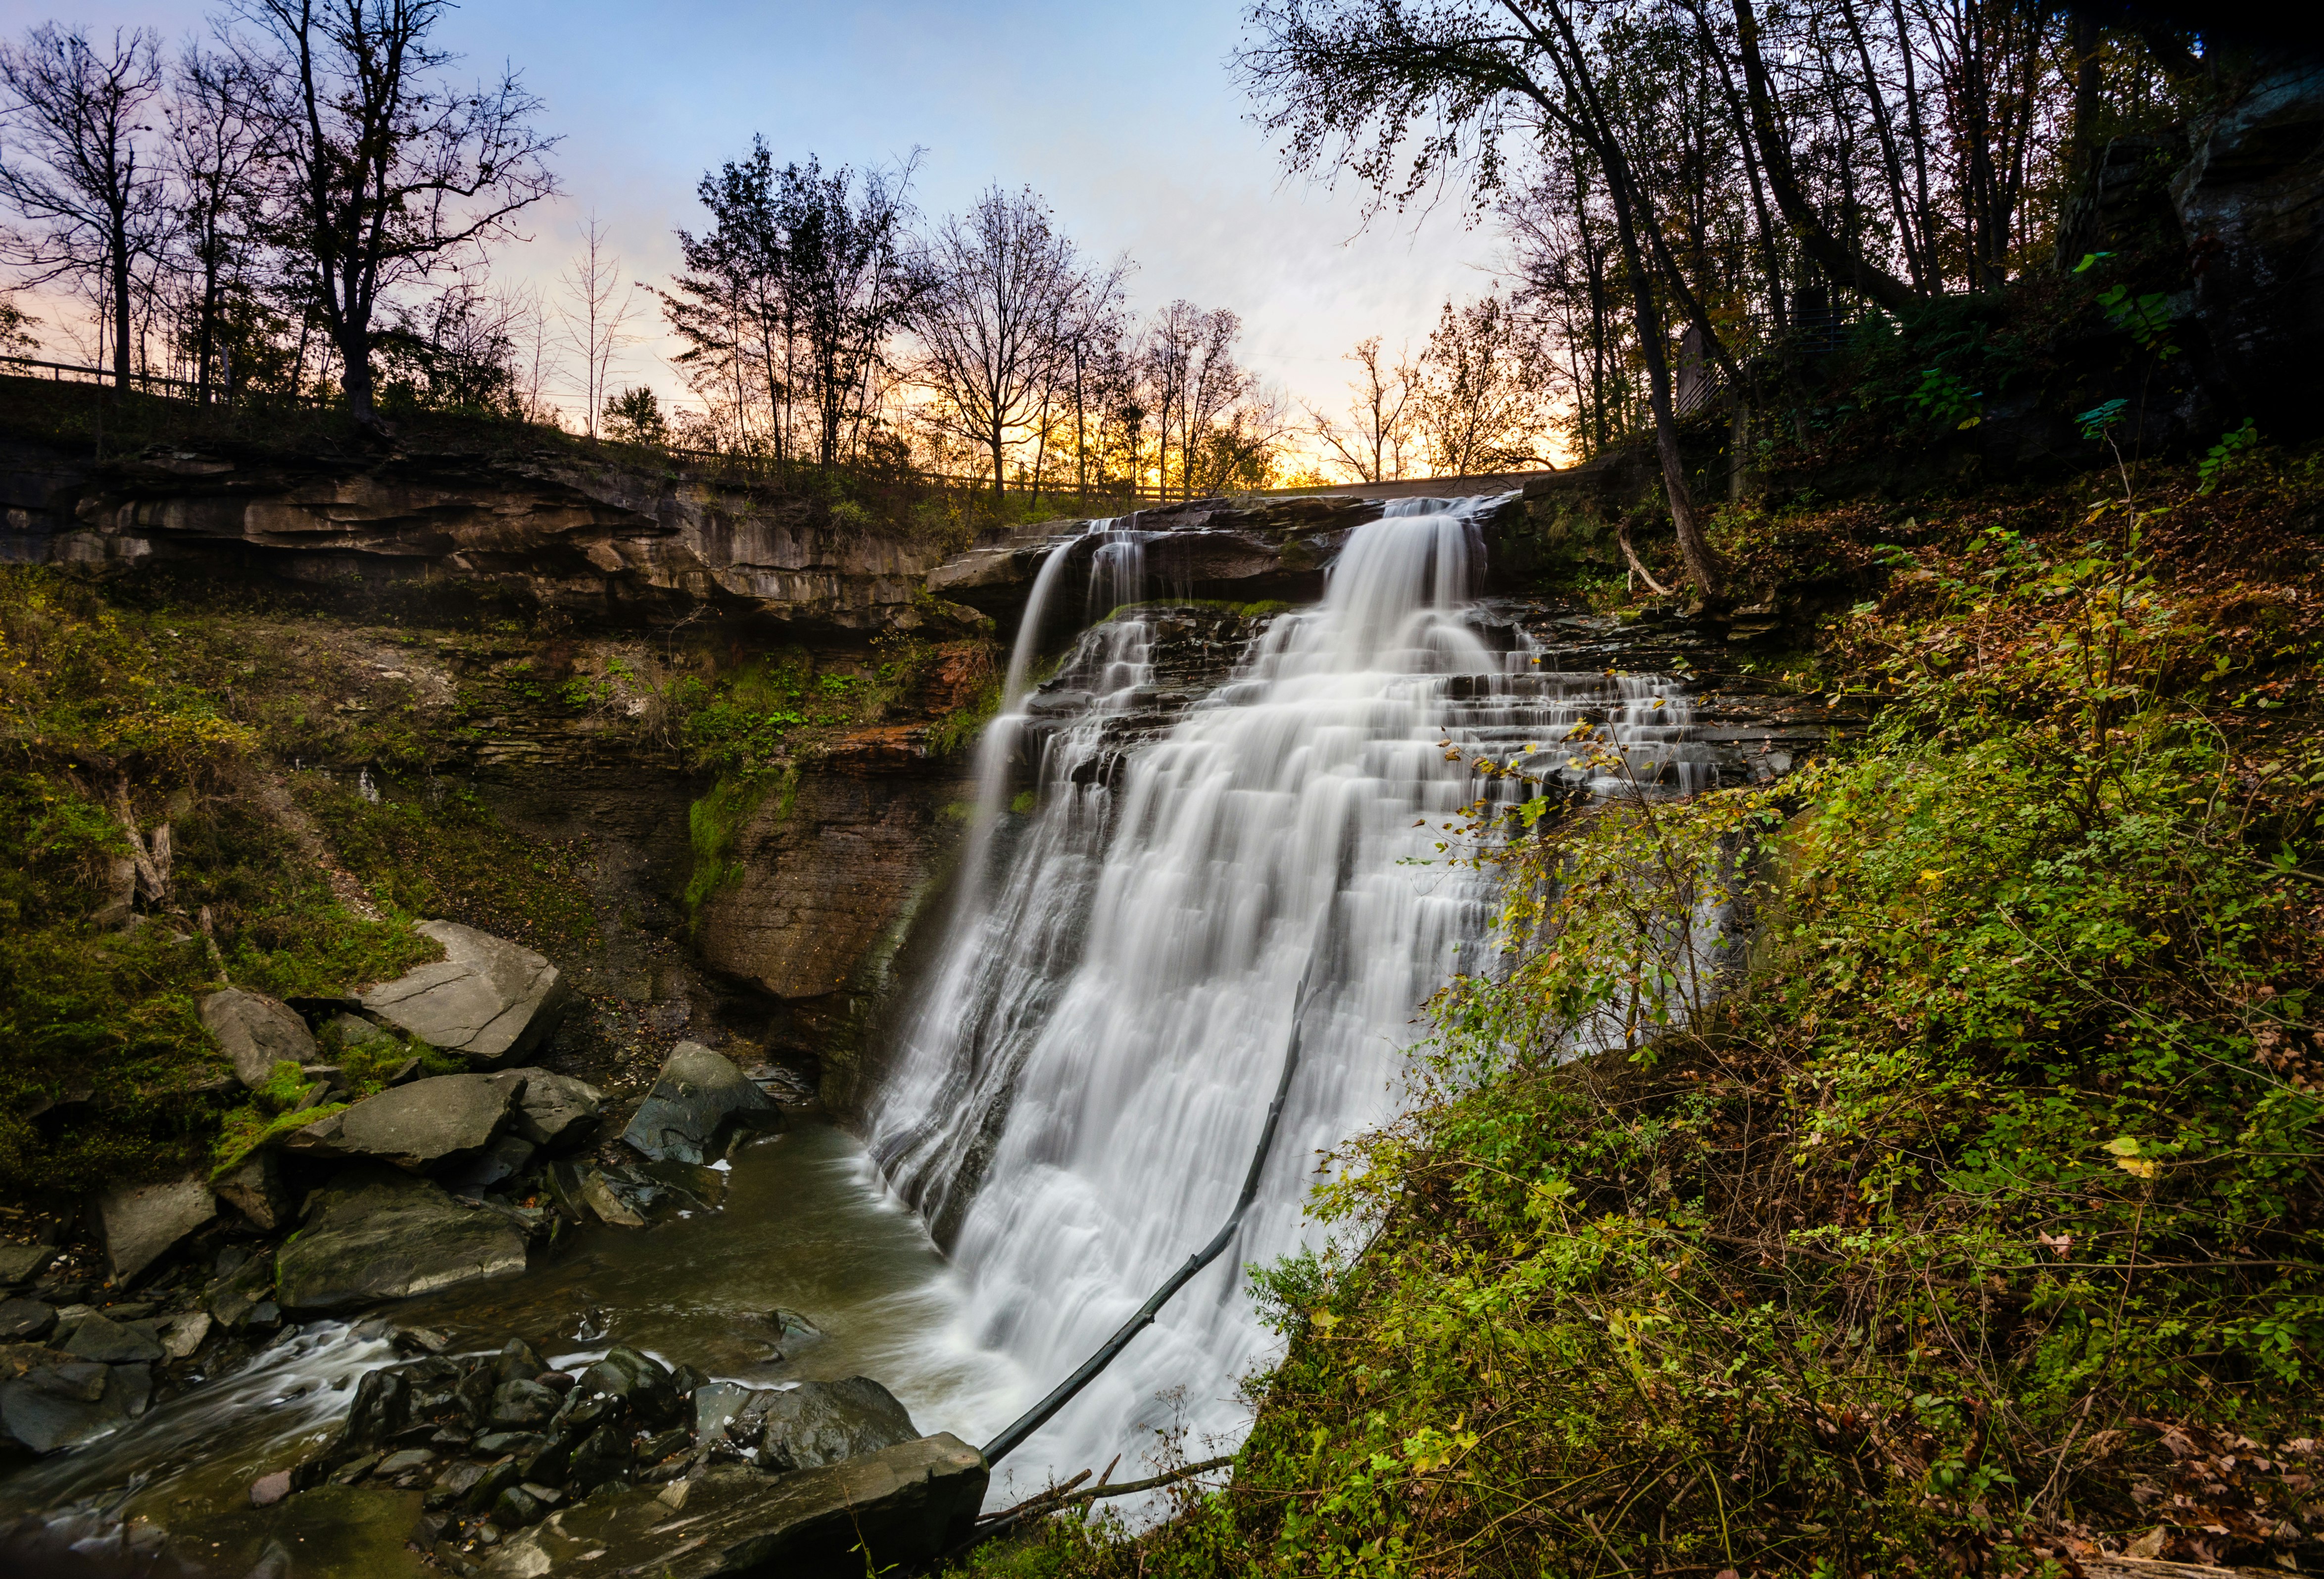 White water spills over narrow stair-stepped rocks that form Brandywine falls in  in Cuyahoga National Park. All around is lush foliage from surrounding shrubs, while on the top of the falls are the black outlines of larger trees against a faded sunset